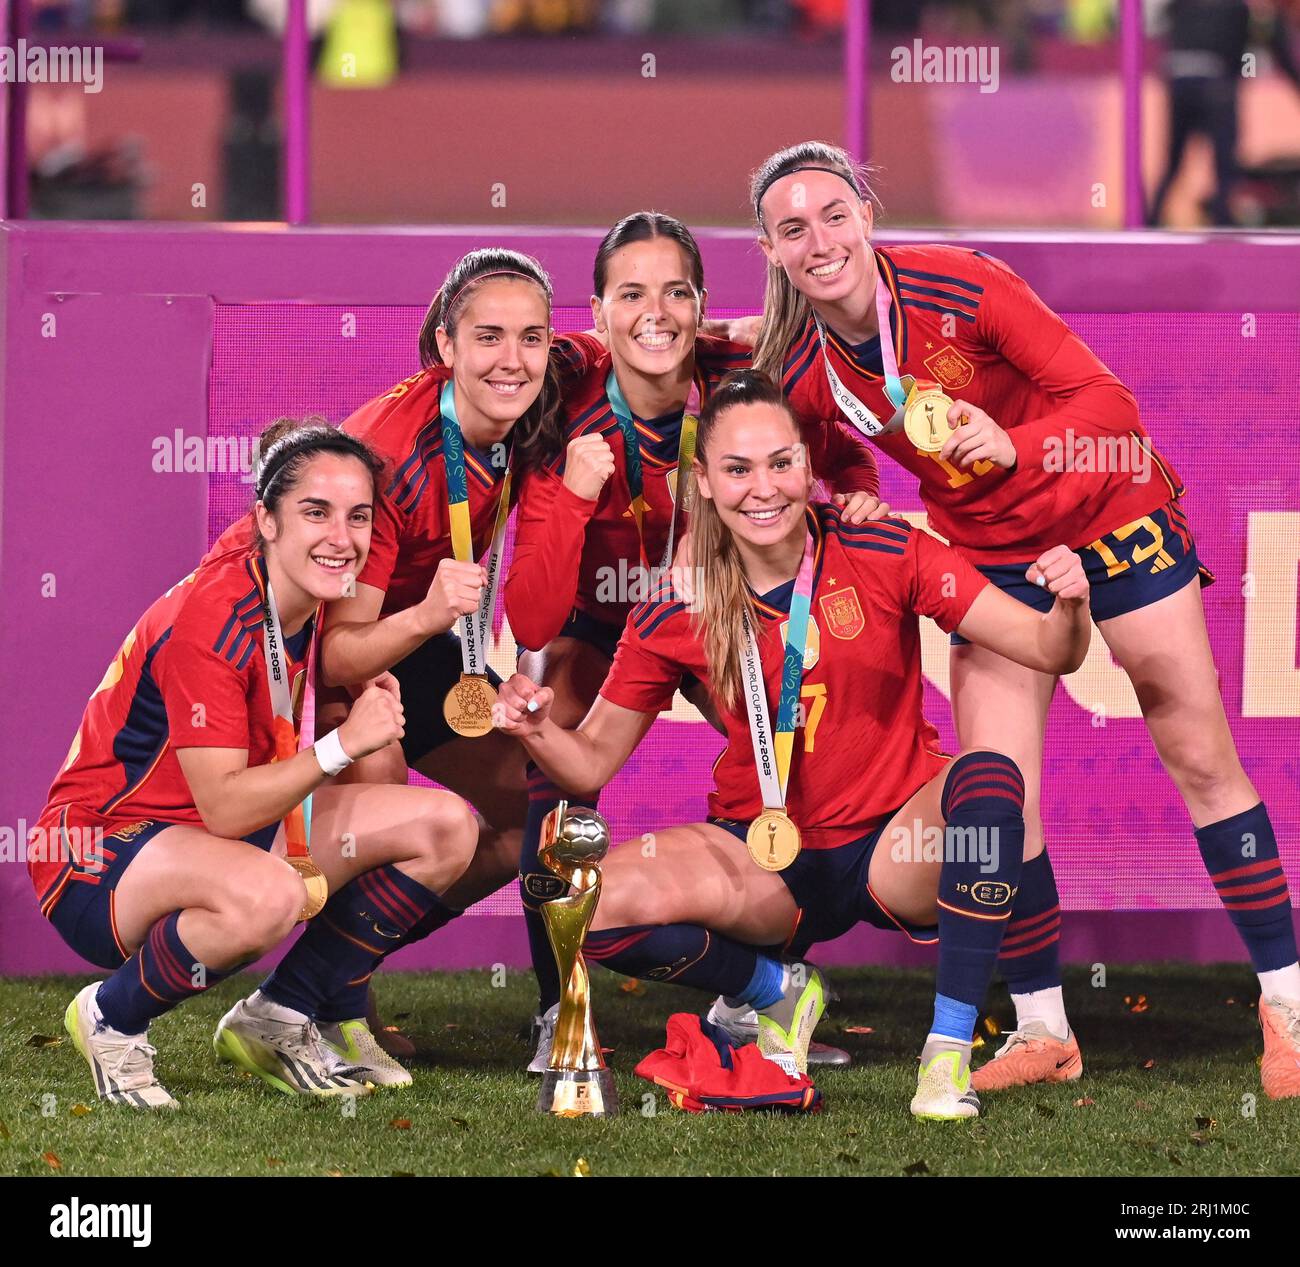 Spain crowned Women's World Cup champions after beating England in